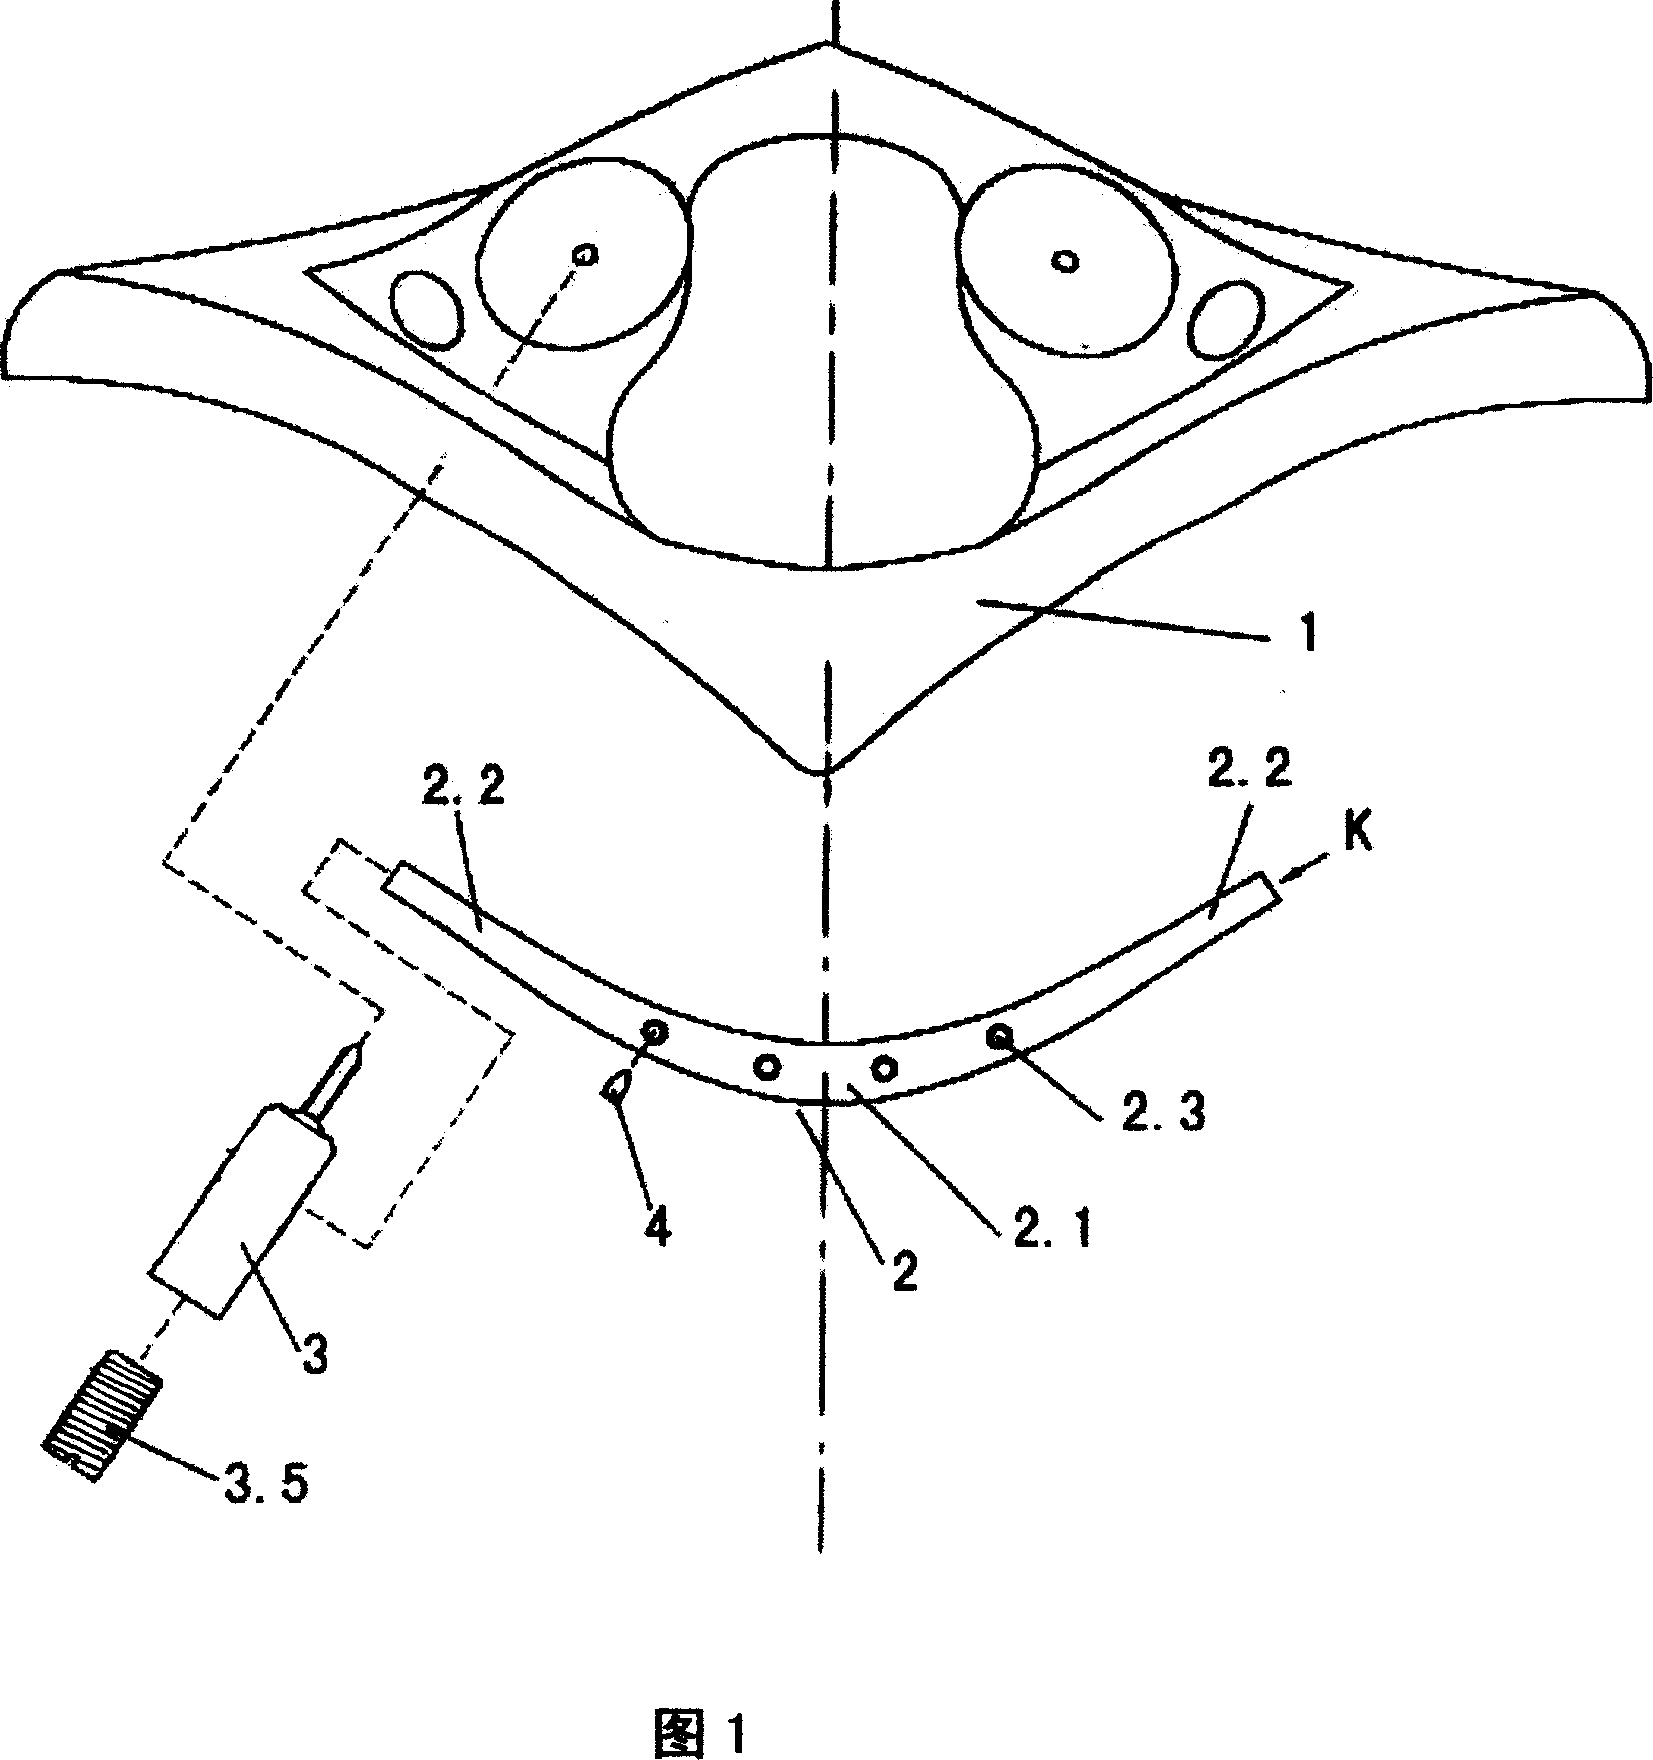 Internal fixing device for rear first cervical vertebrae